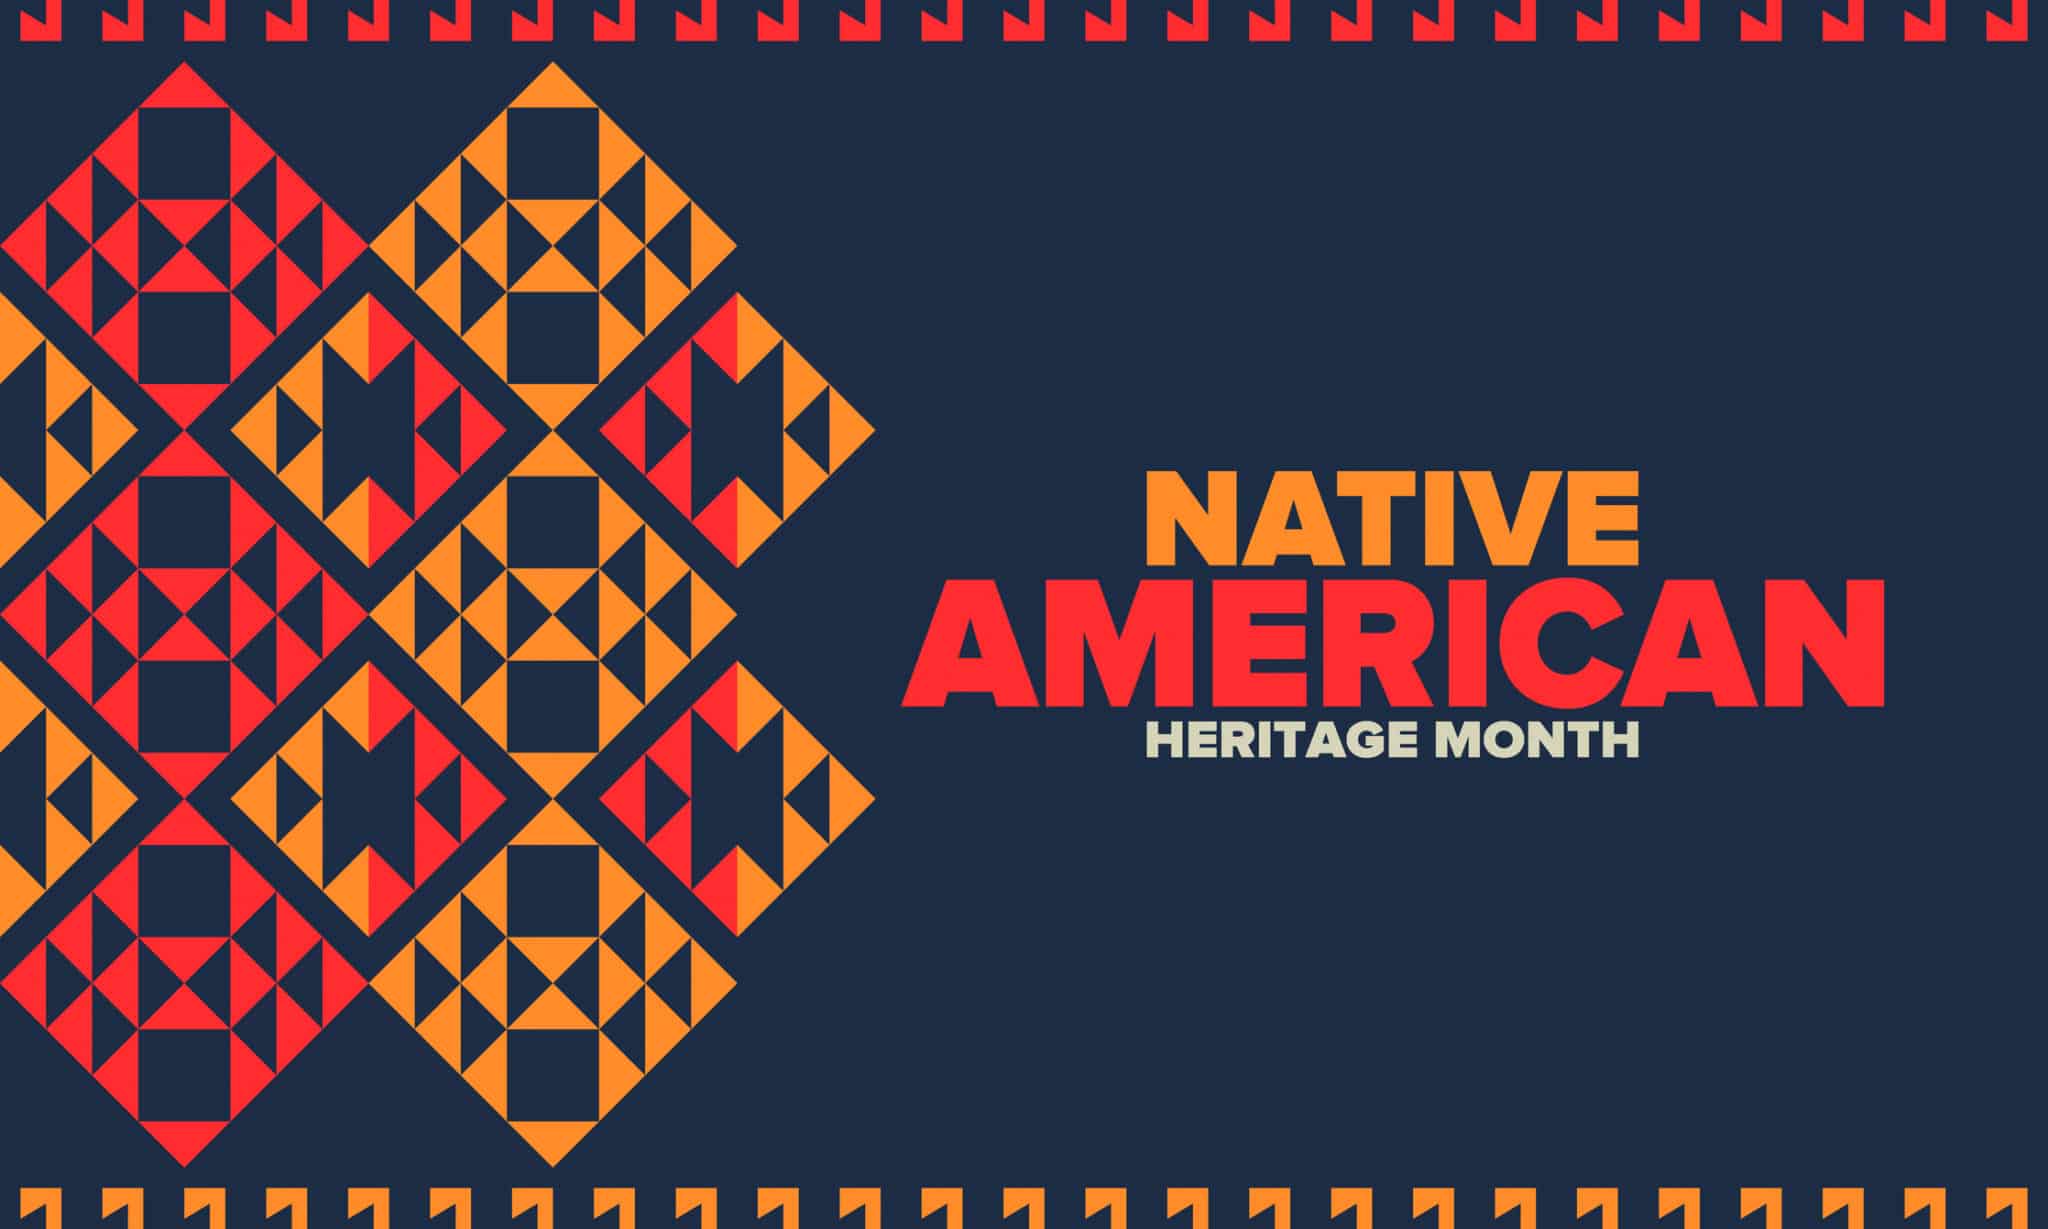 It's Not Too Late to Celebrate Native American Heritage Month! Forum